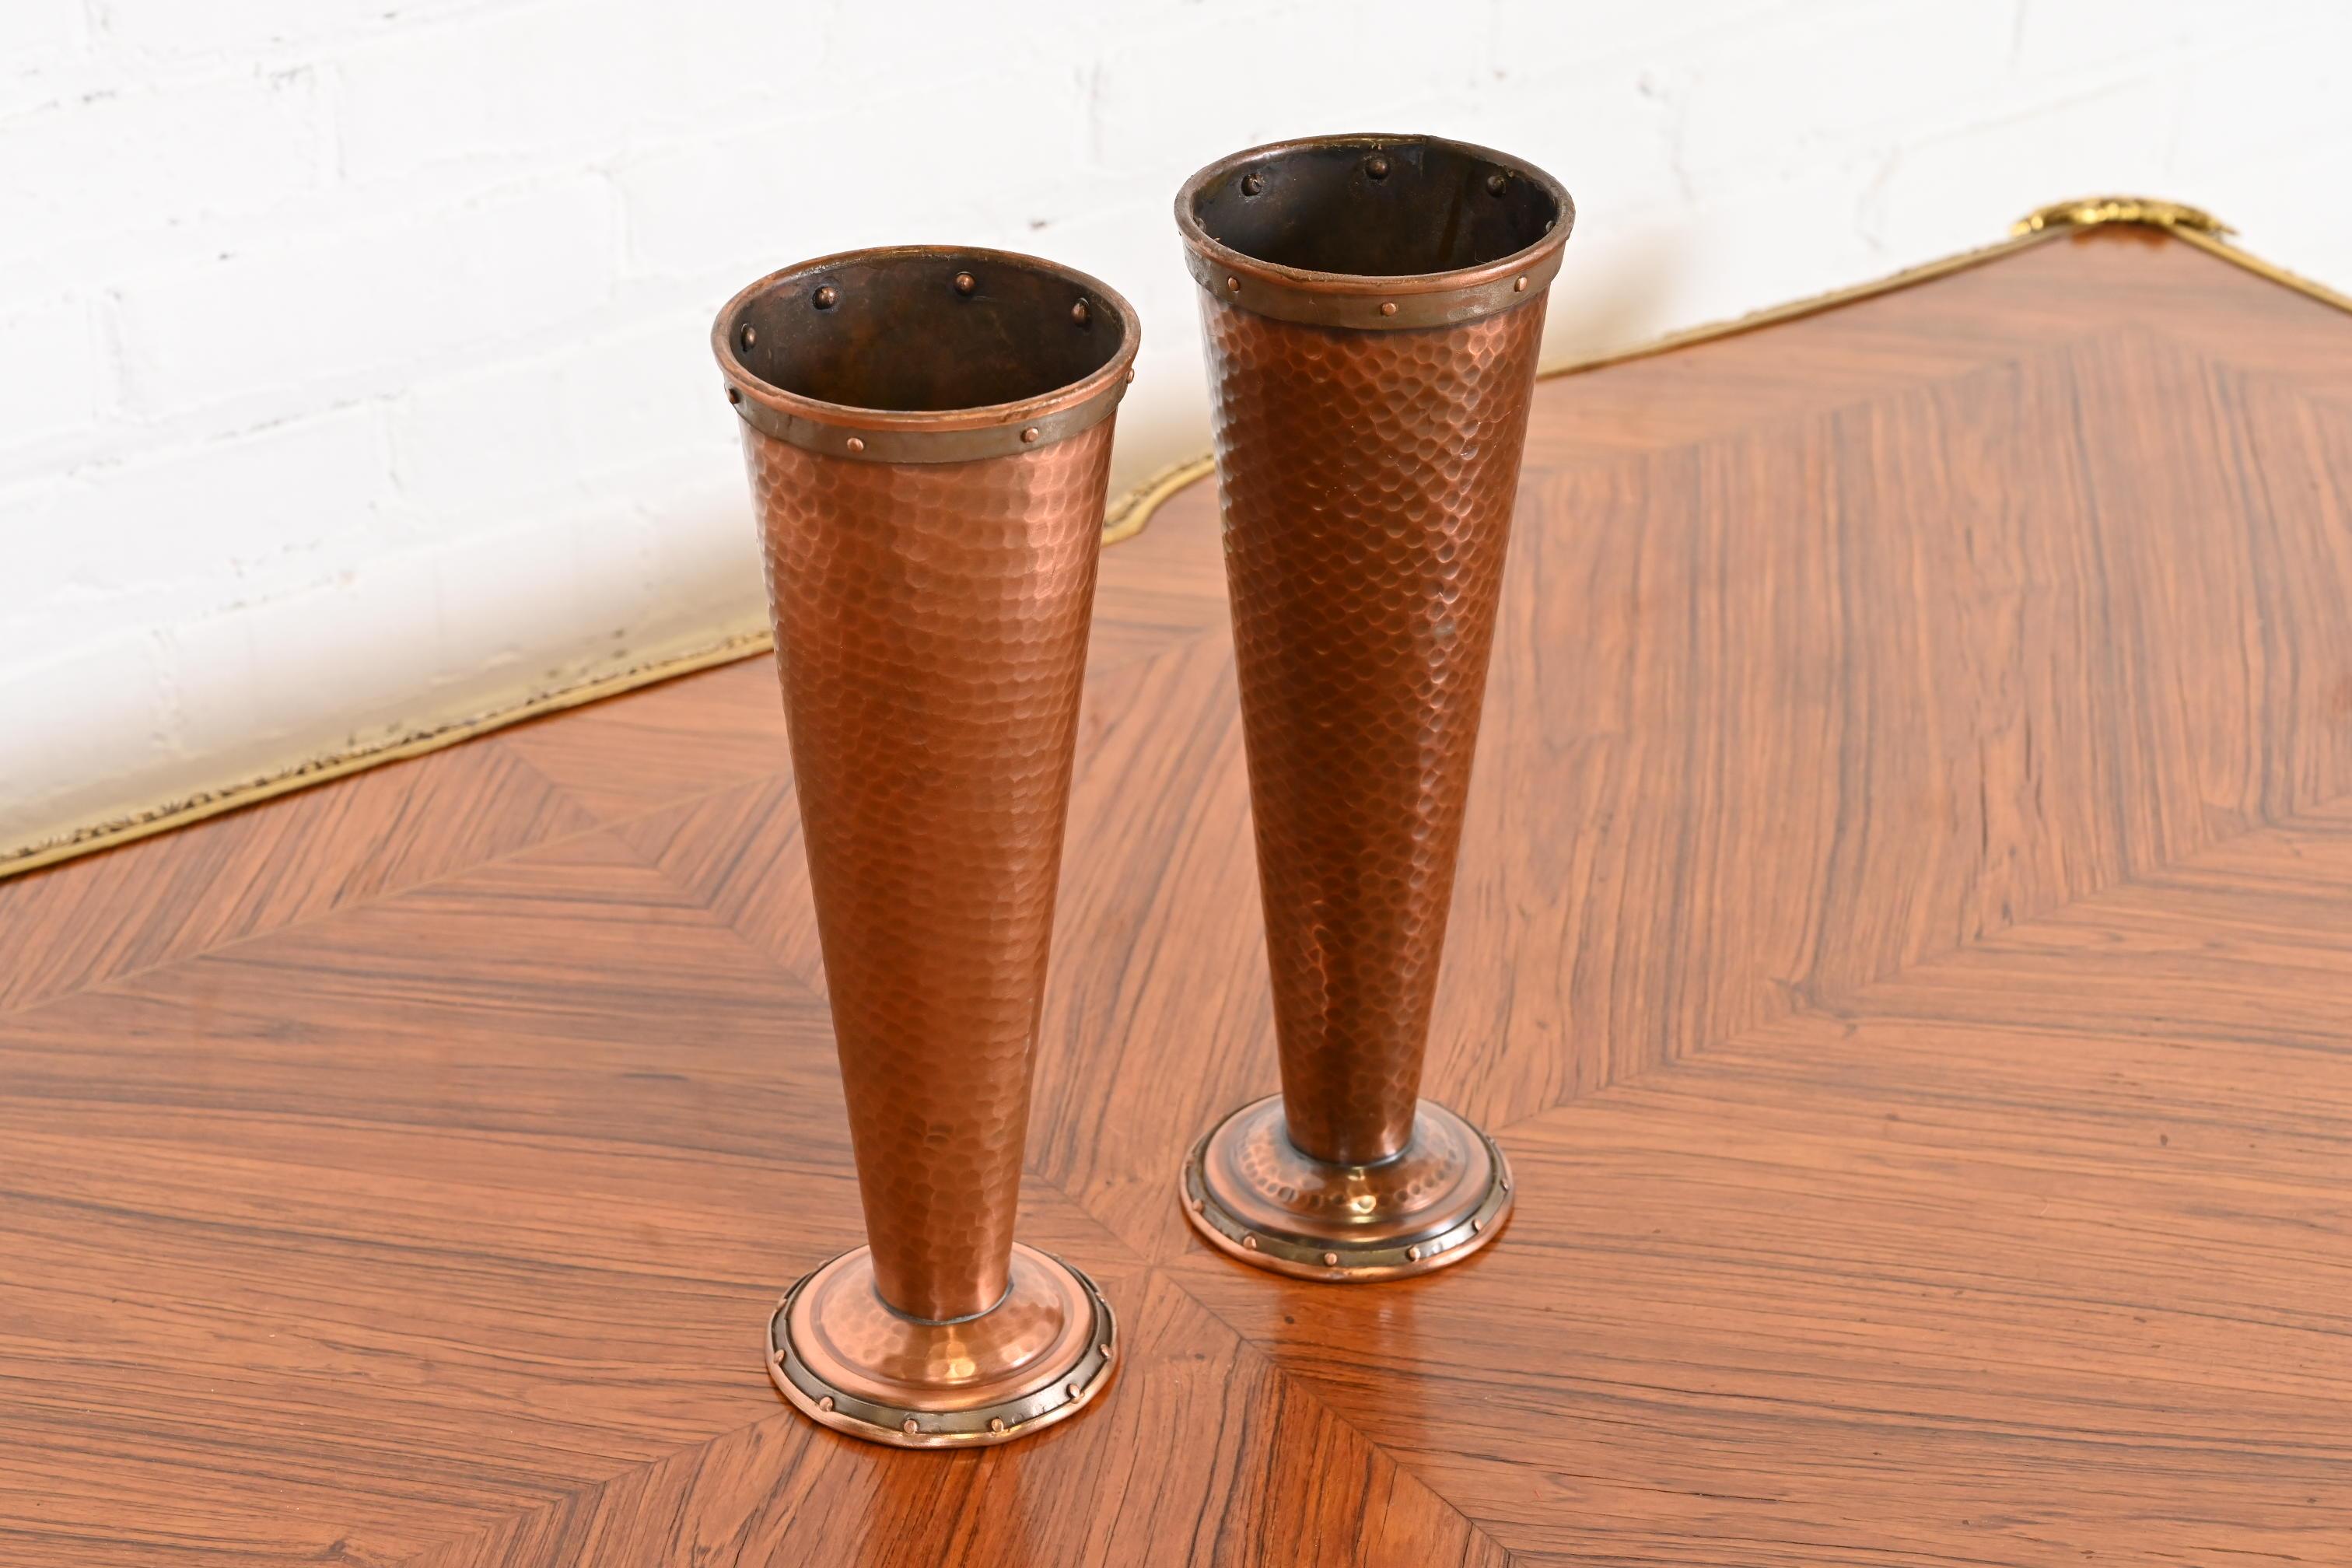 Joseph Heinrichs Style Arts and Crafts Hand-Hammered Copper Vases, Pair For Sale 1